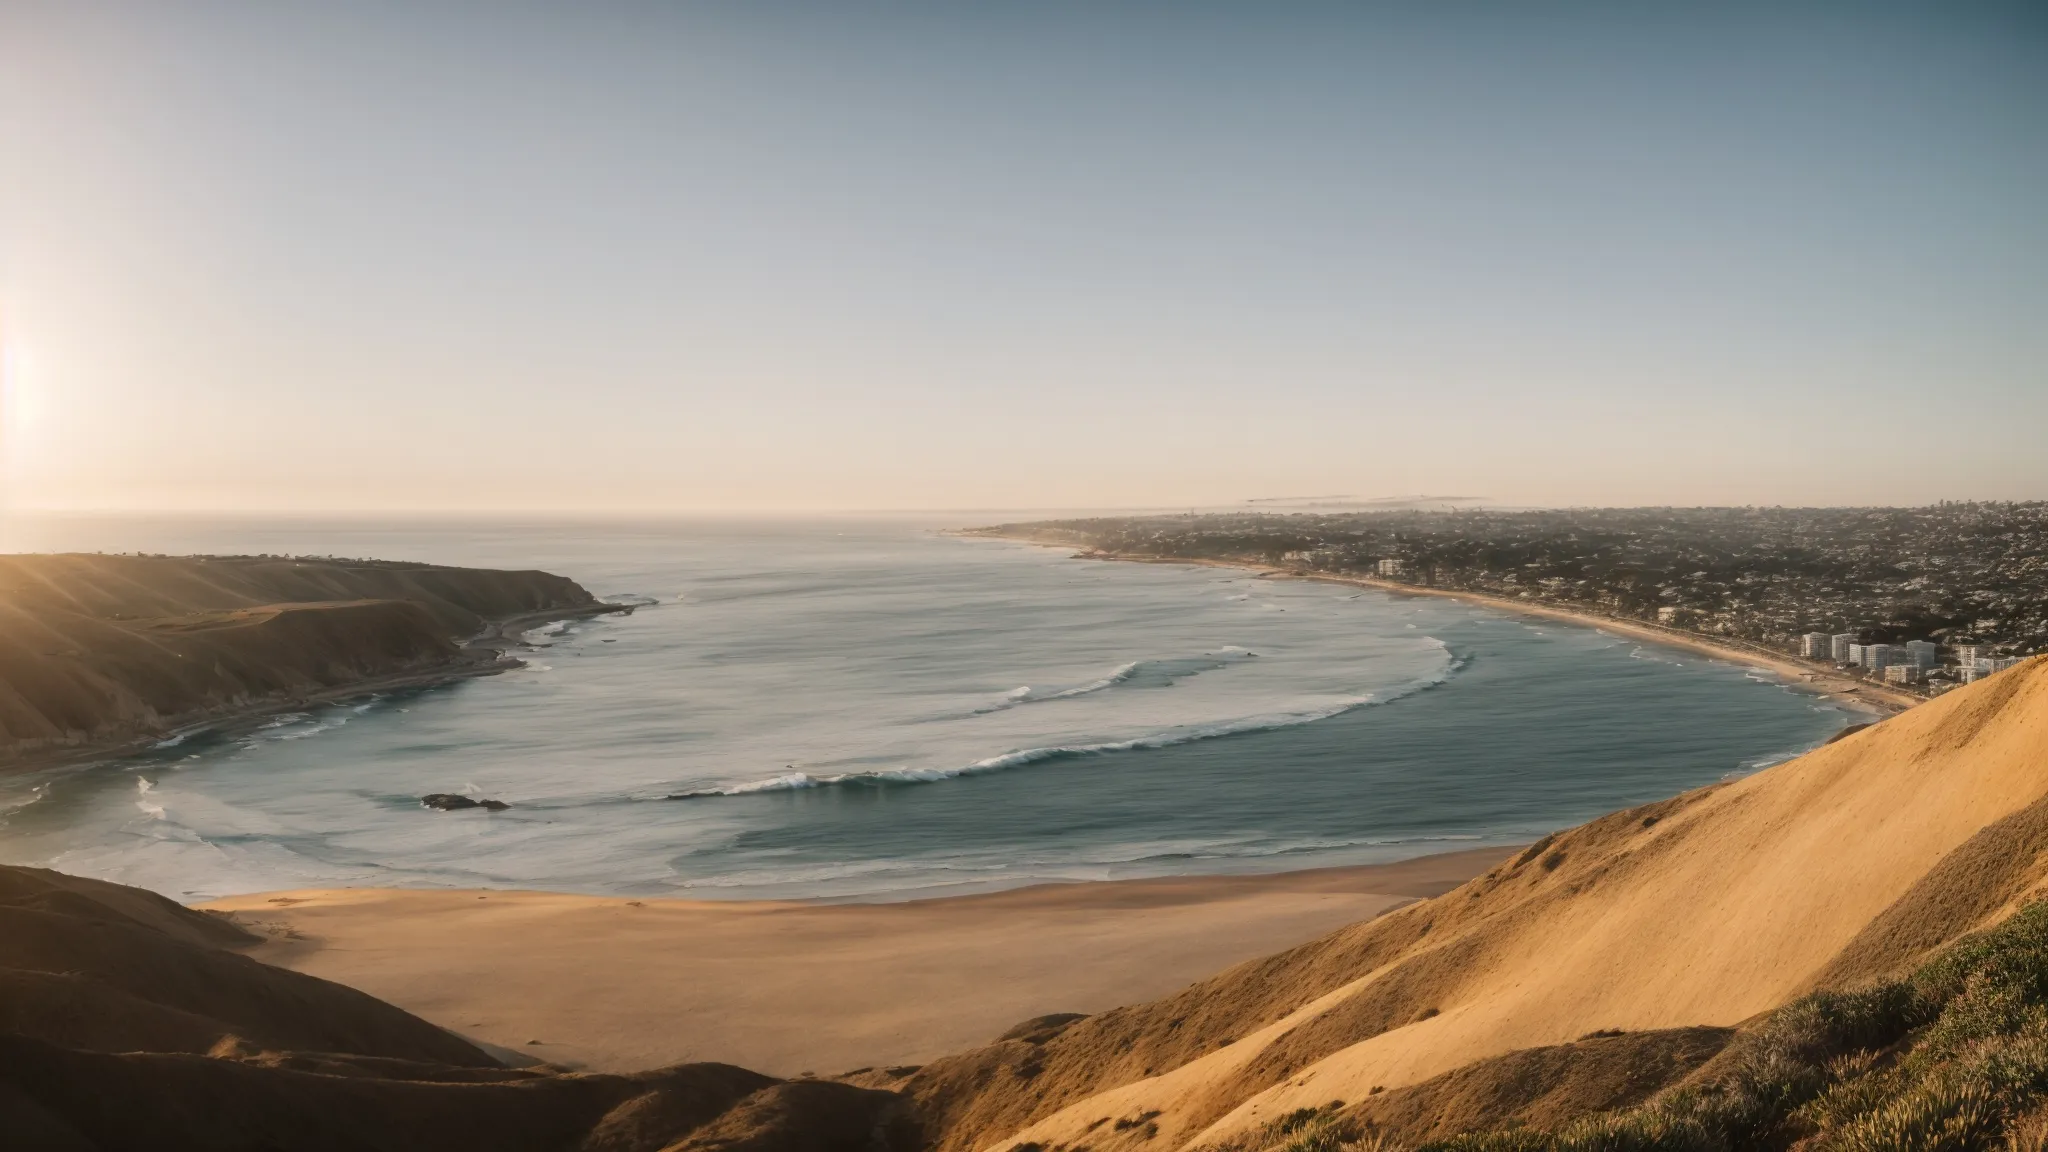 a panoramic view of san diego's coastline bathed in golden light with the pacific ocean extending to the horizon.